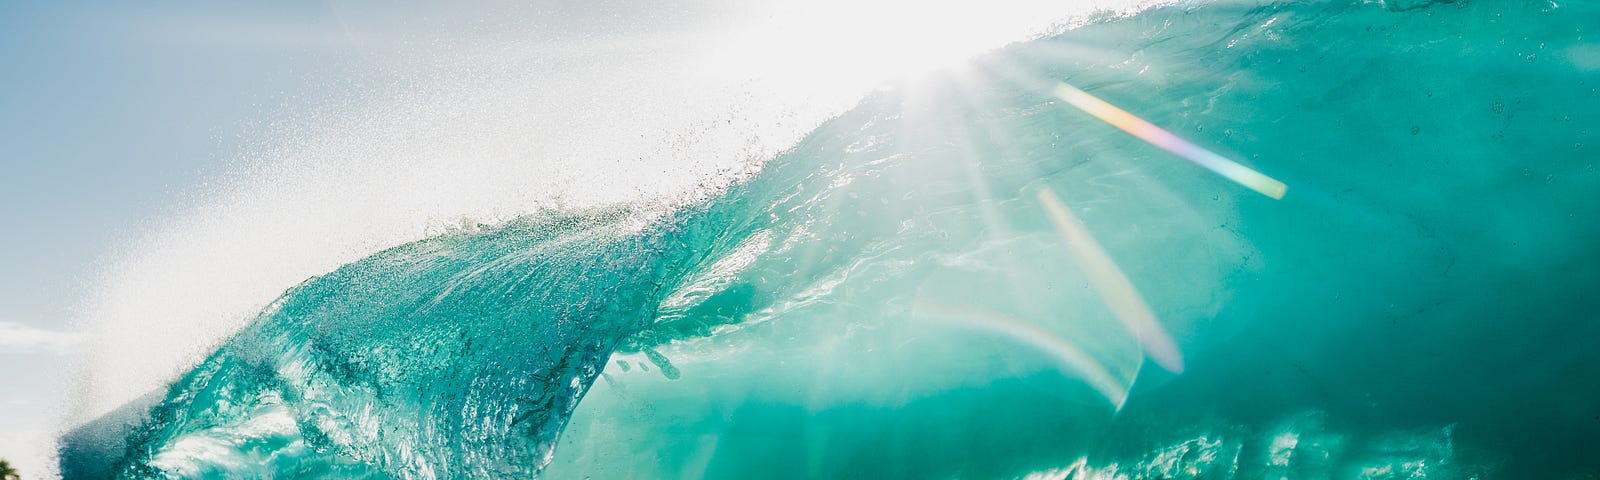 Sunlight sparkling on a turquoise-green ocean wave.